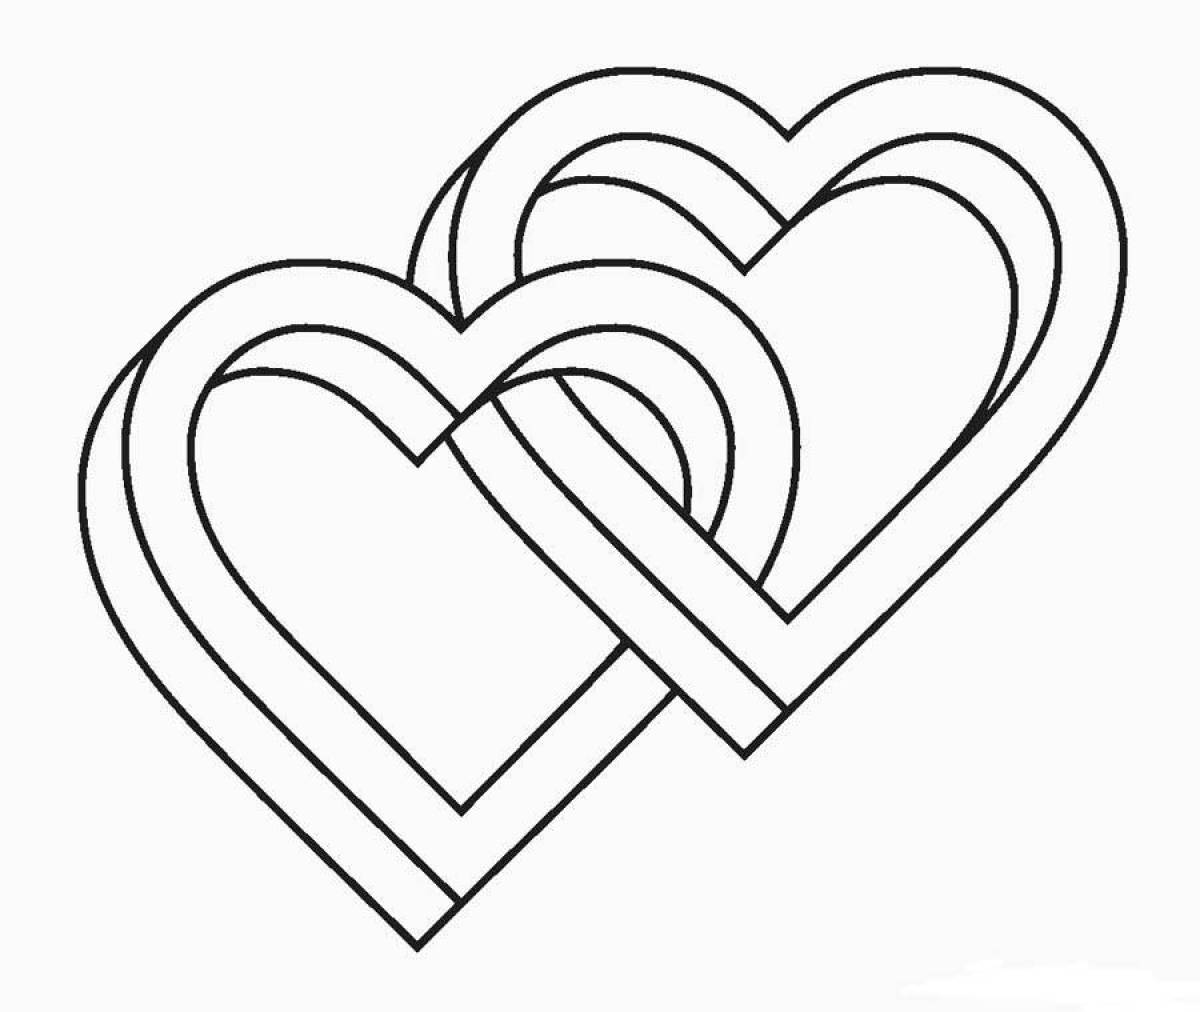 Delightful heart coloring page